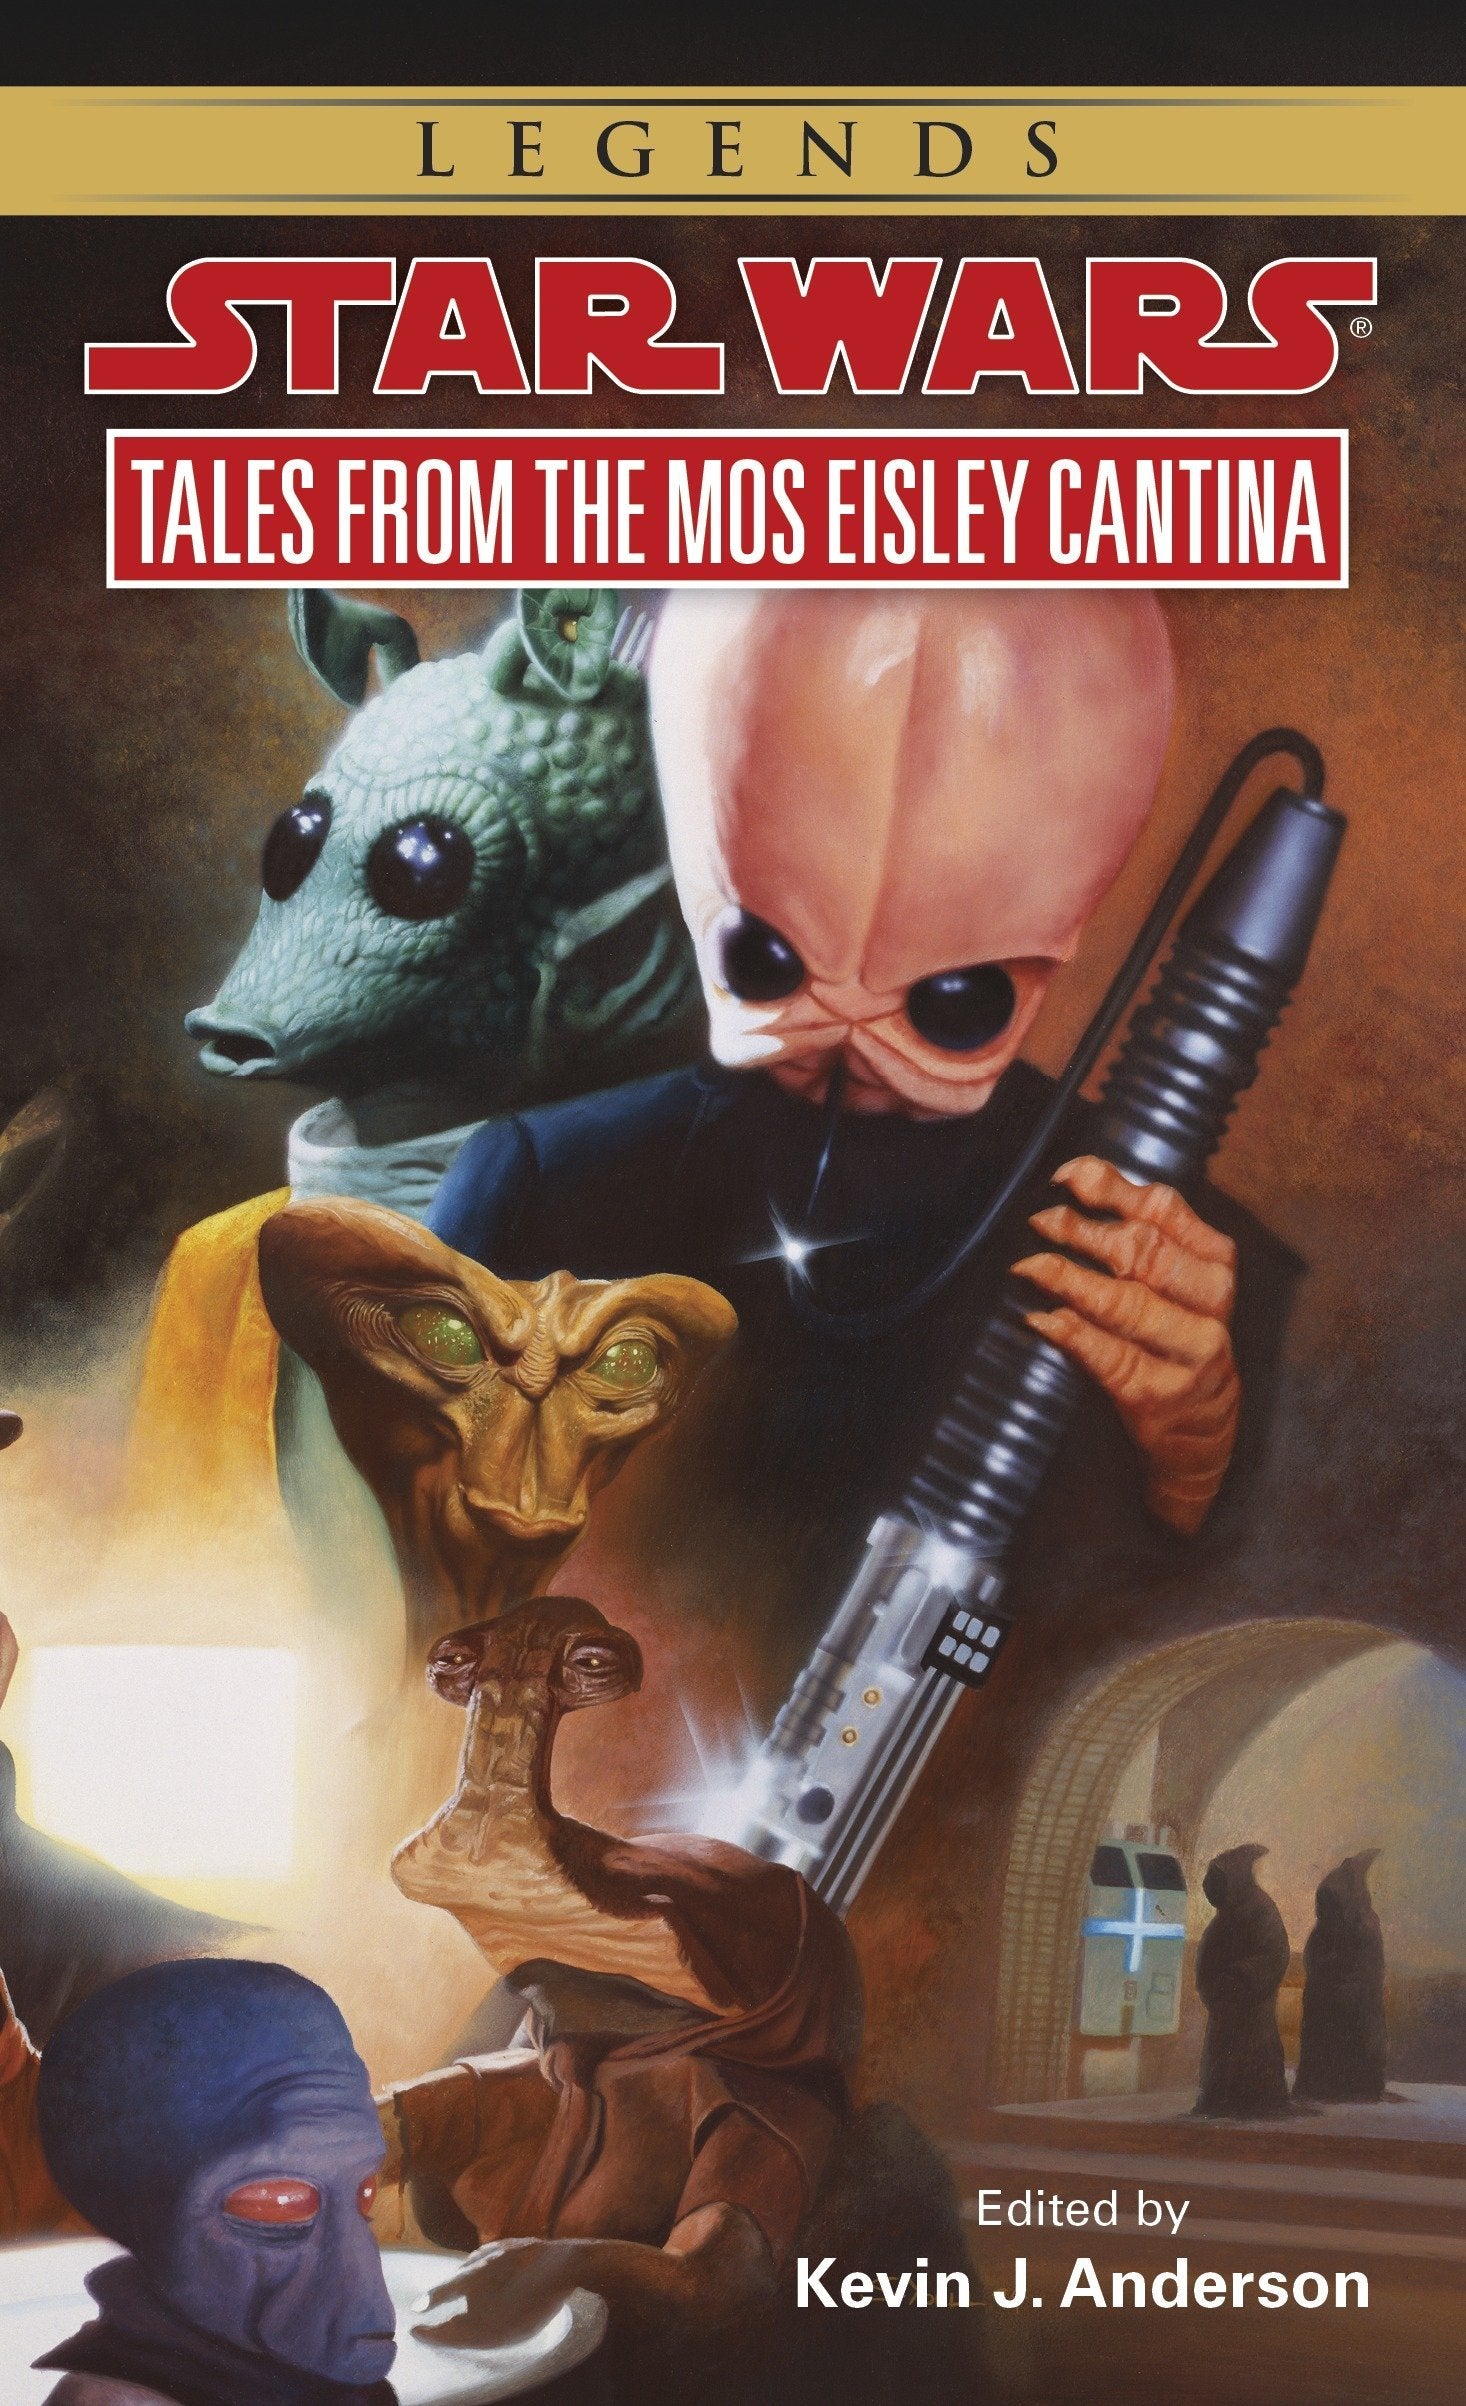 Livre ISBN 0553564684 Star Wars Legends : Tales From the Mos Eisley Cantina (Kevin J. Anderson)